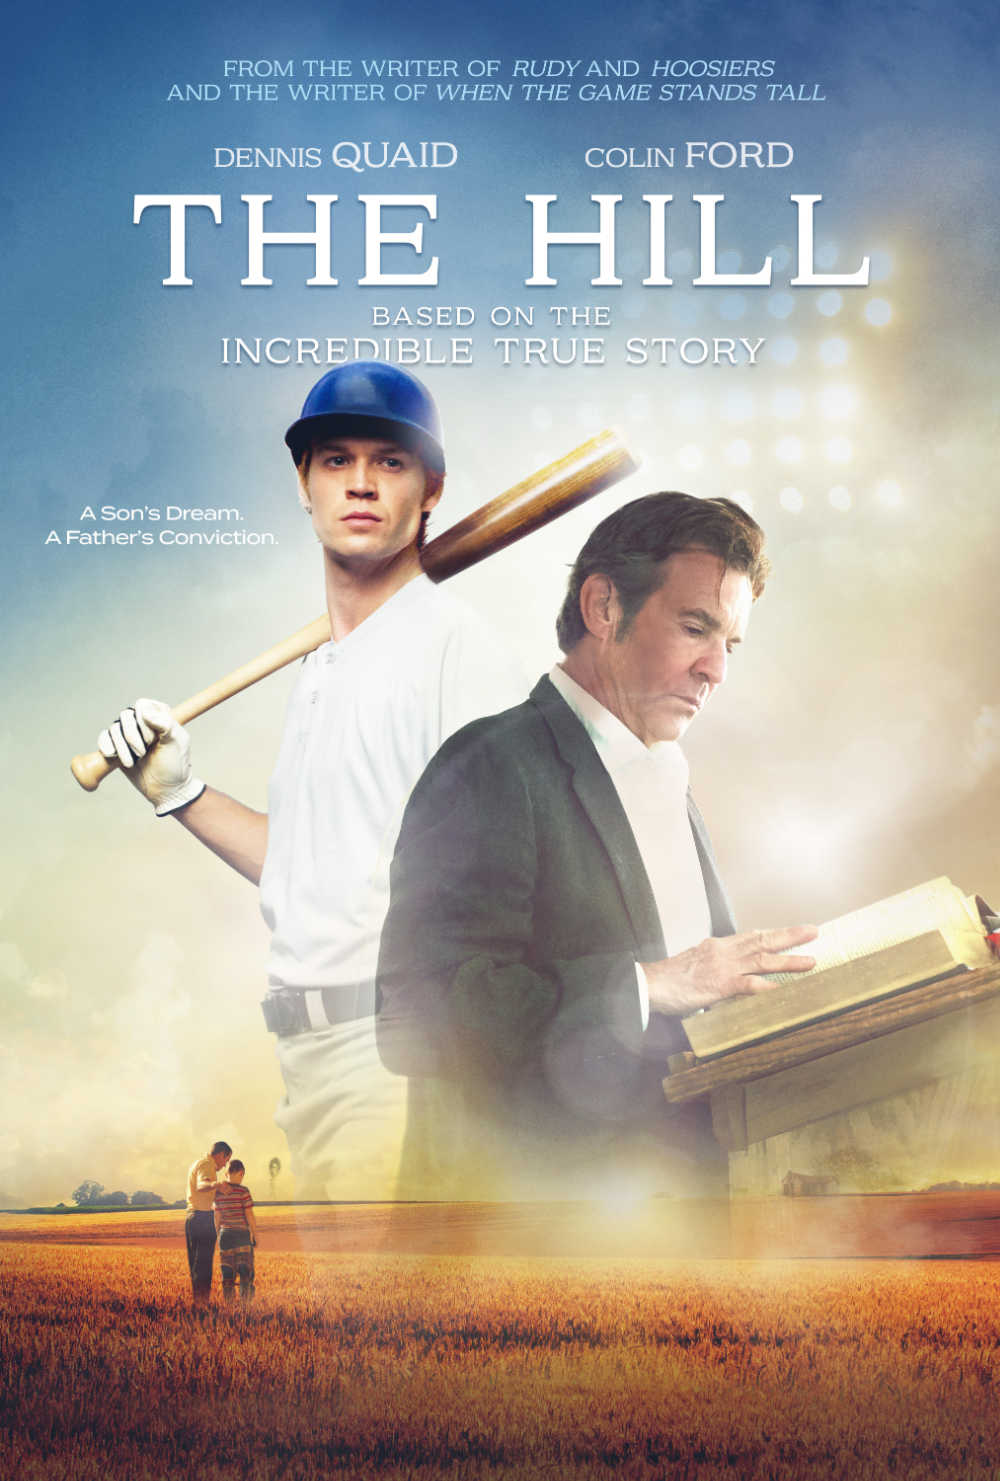 The Hill is a new movie based on the true story of Rickey Hill, a young man who overcame incredible challenges to achieve his dream of playing Major League Baseball.